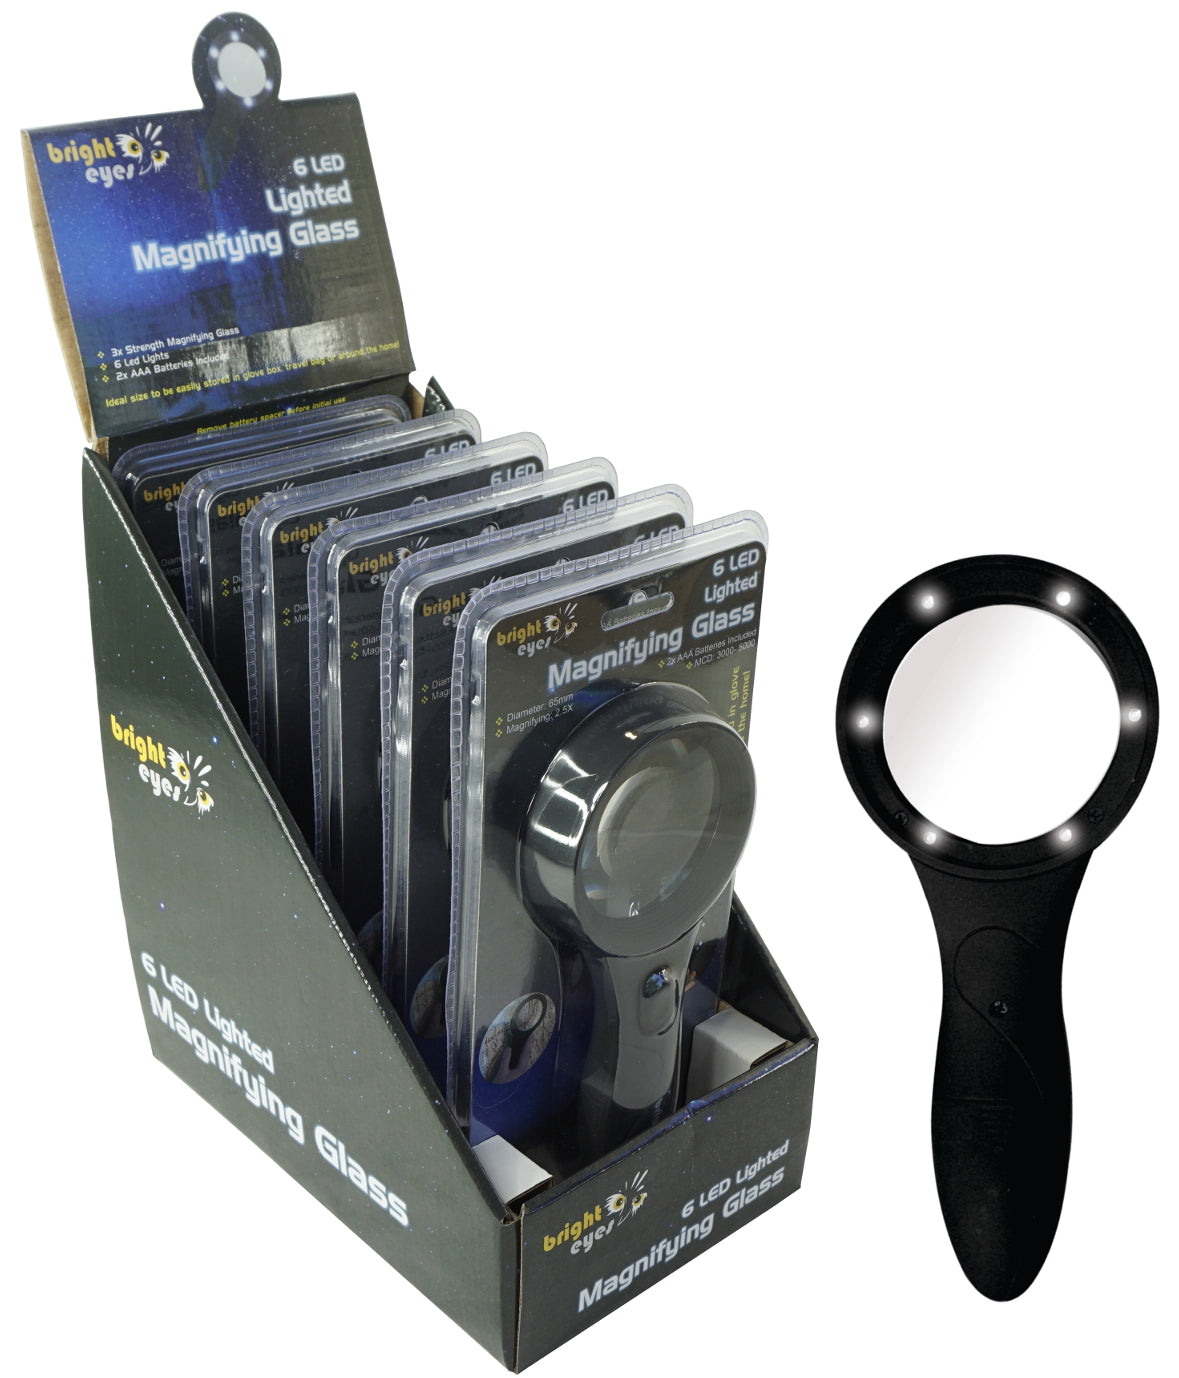 65mm Glass Magnifier with LED Lights 14506 by Bright Eyes